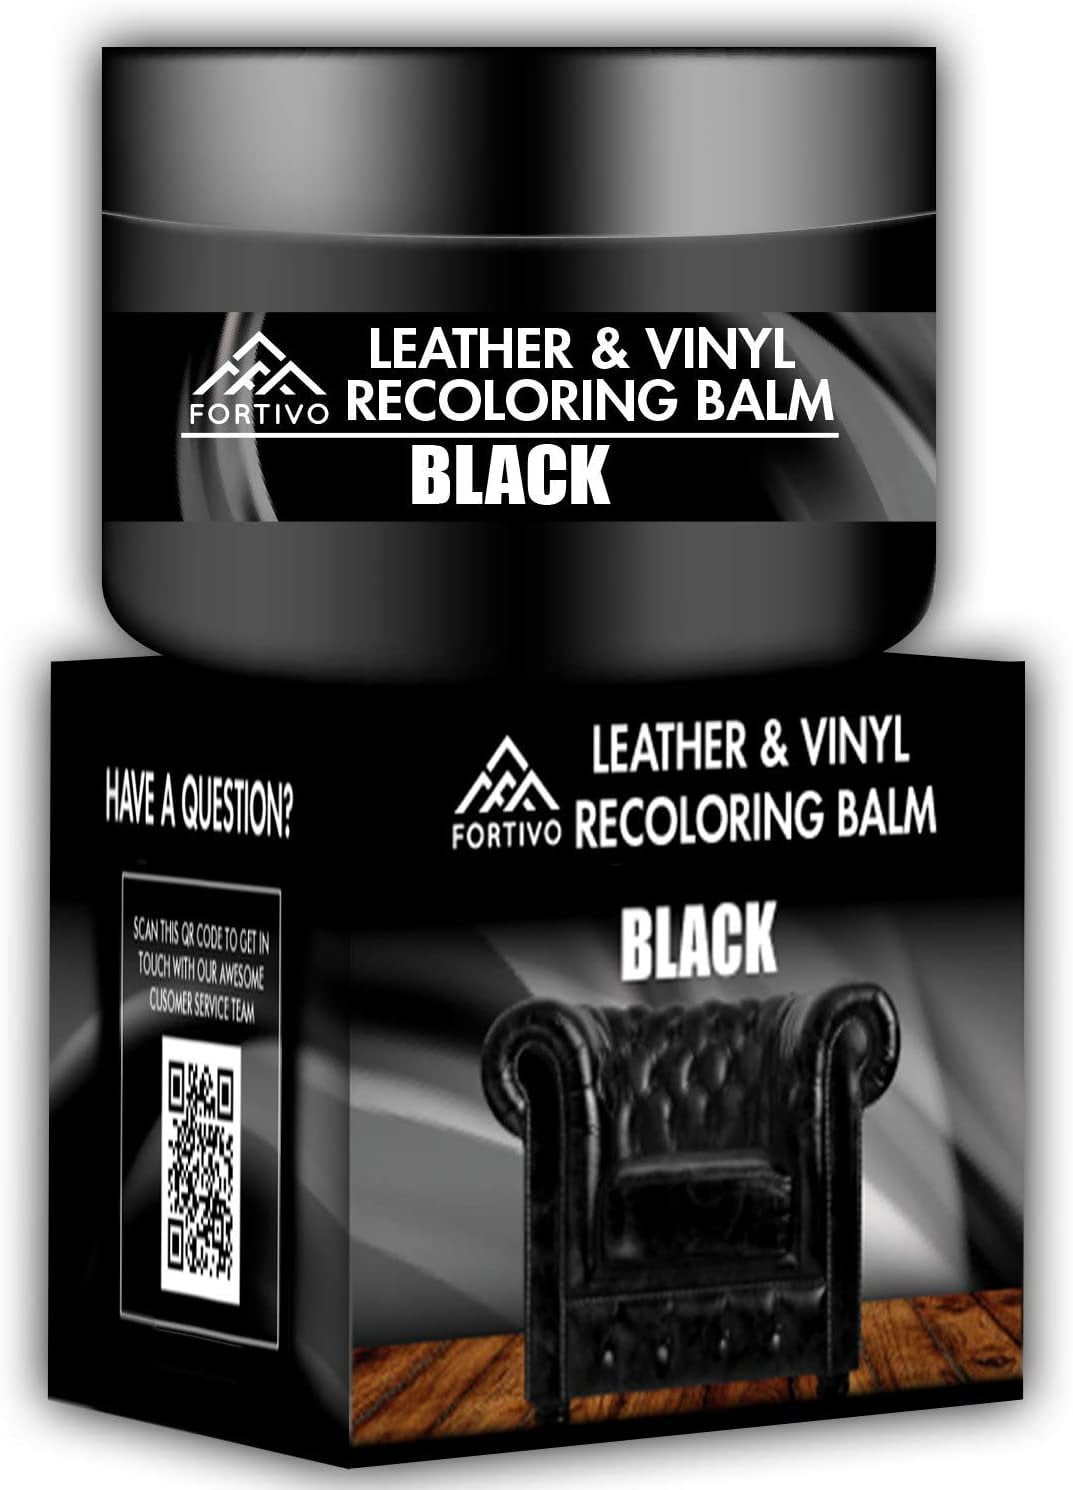 Leather Recoloring Balm - Mink Oil, Leather Repair Kit for Furniture, Black  Leather Dye for Furniture, Leather Repair Kit, Mink Oil Leather Balm,  Leather Repair Kit for Couches, Mink Oil for Leather